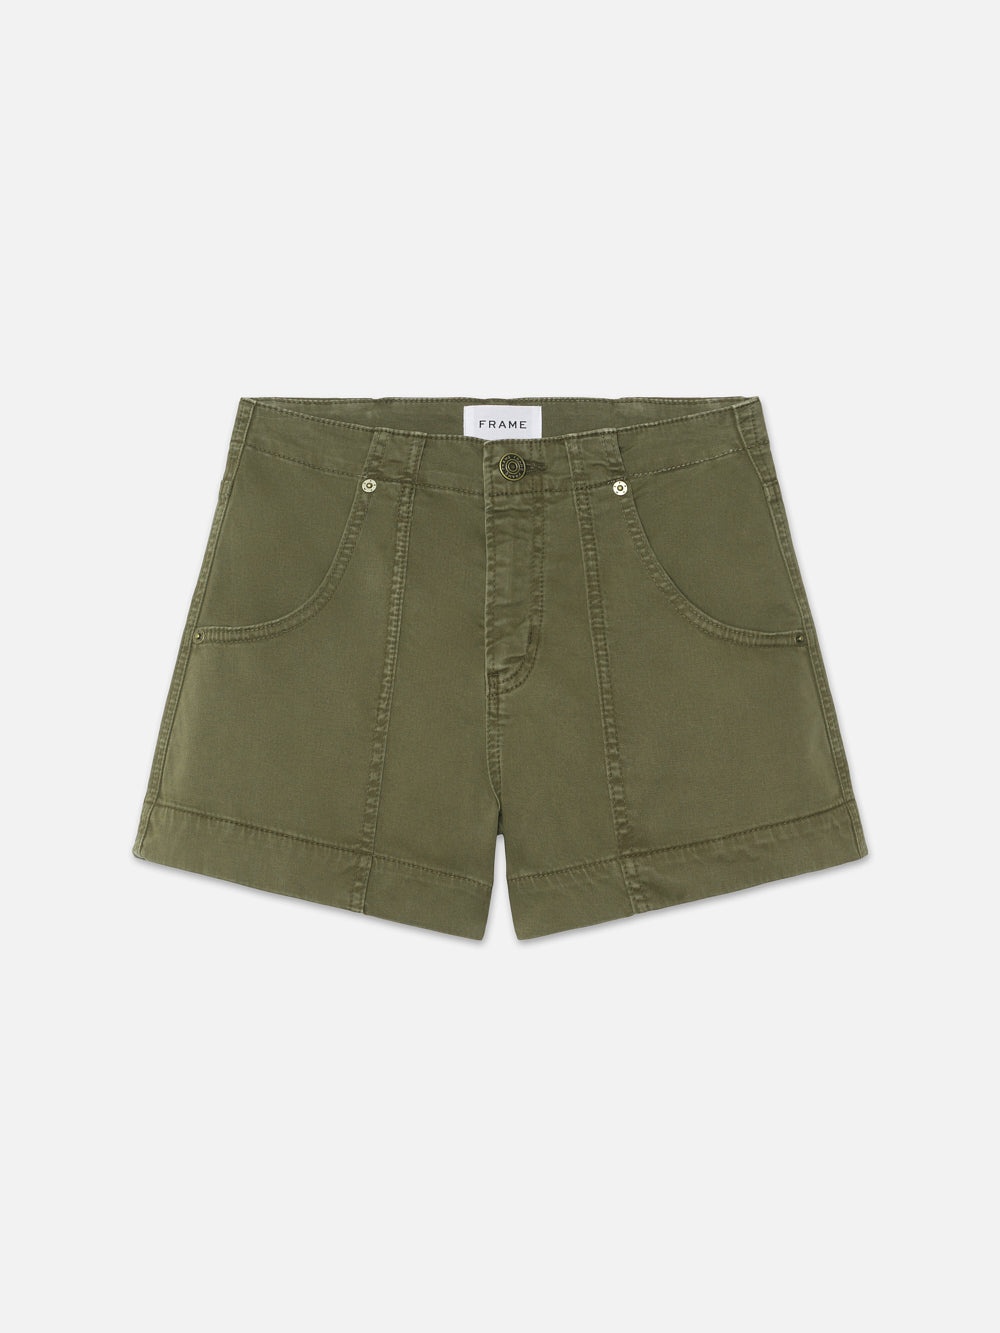 Clean Utility Short in Washed Winter Moss - 1